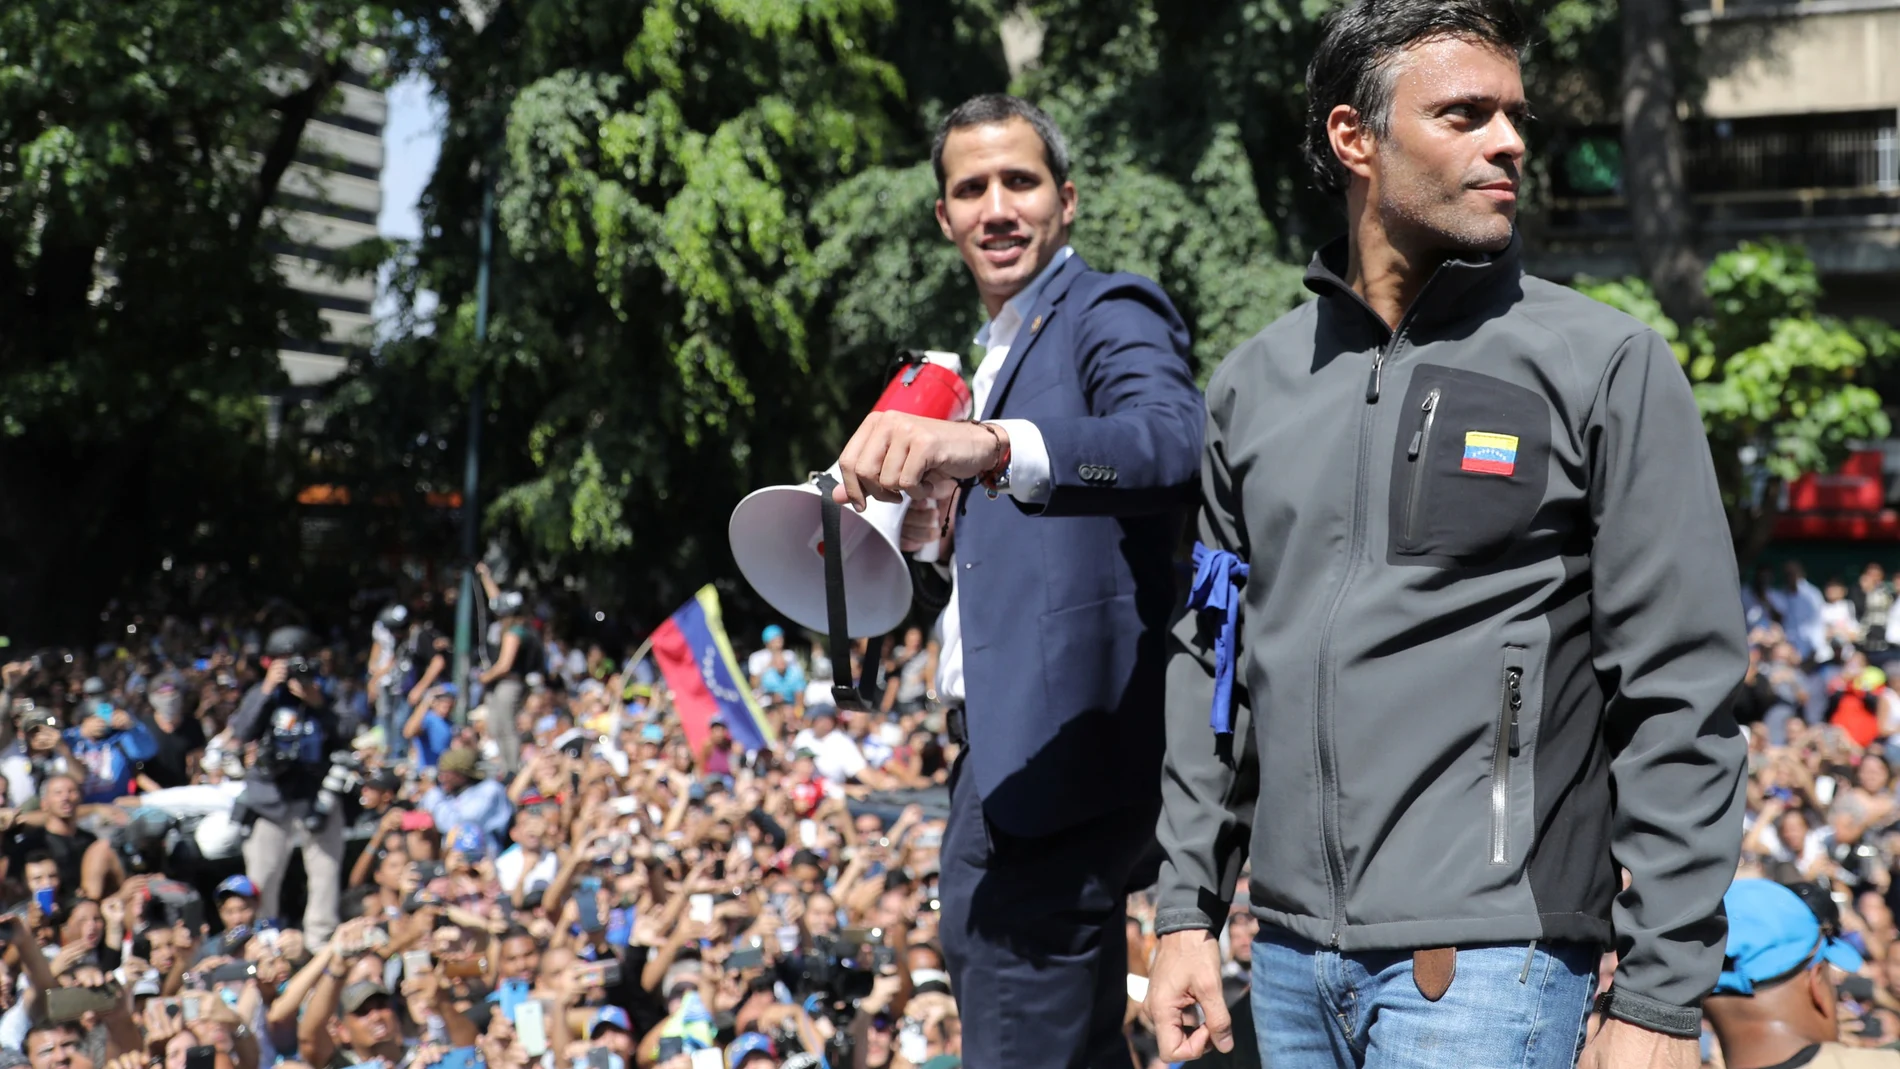 Venezuelan opposition leader Juan Guaido, who many nations have recognised as the country's rightful interim ruler and fellow opposition leader Leopoldo Lopez address a crowd of supporters in Caracas.